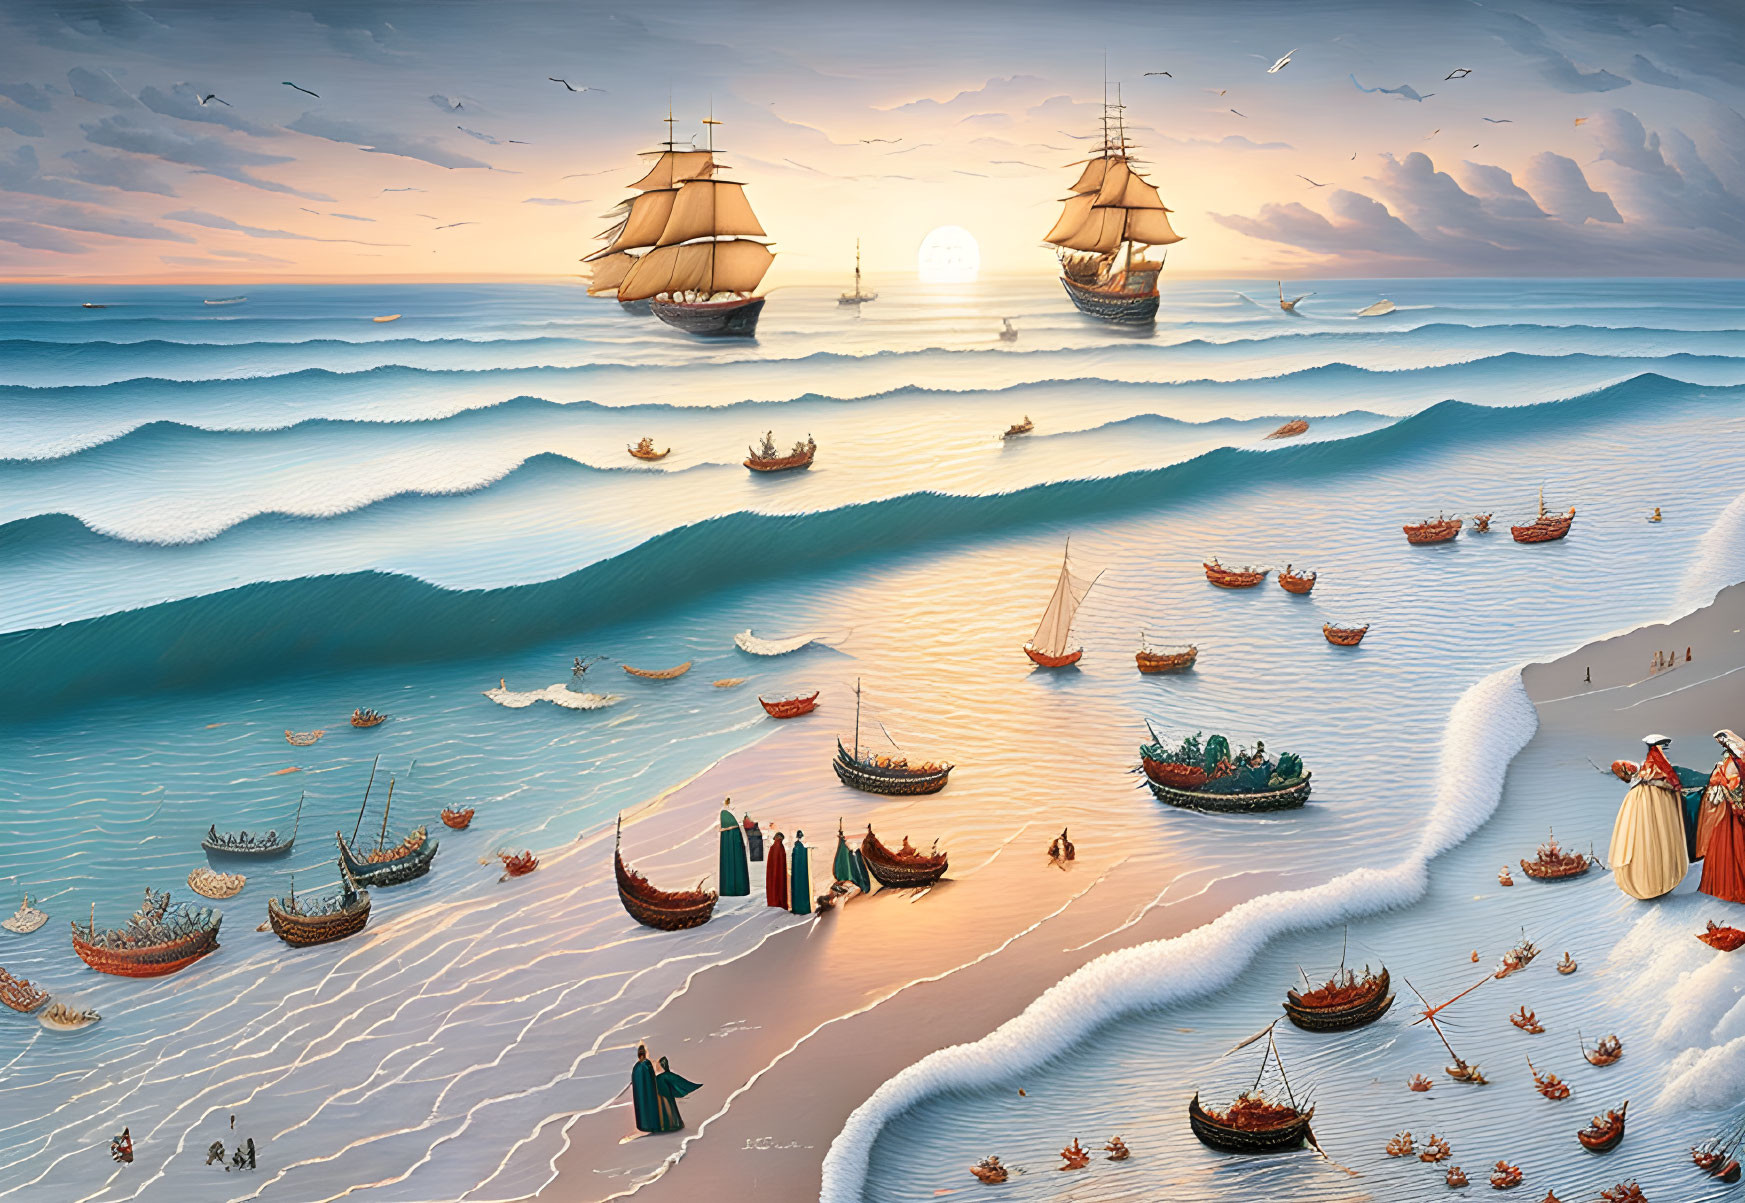 Maritime painting with ships, boats, and sunset seascape